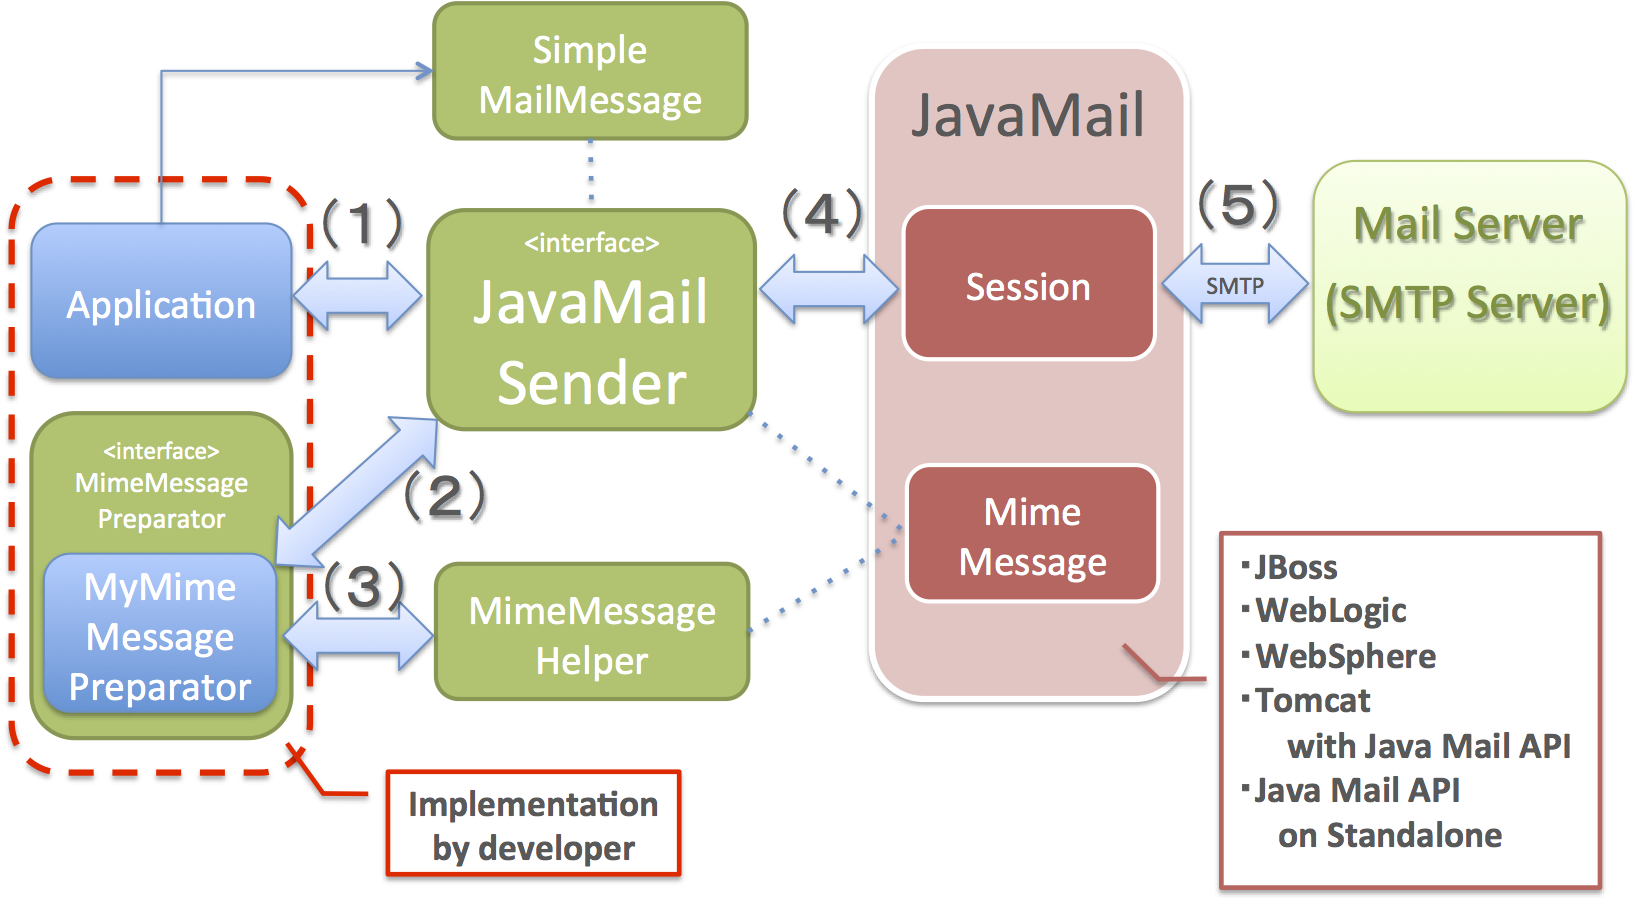 How to Send an Email using Java MailAPI with Large Image as an Attachment • Crunchify